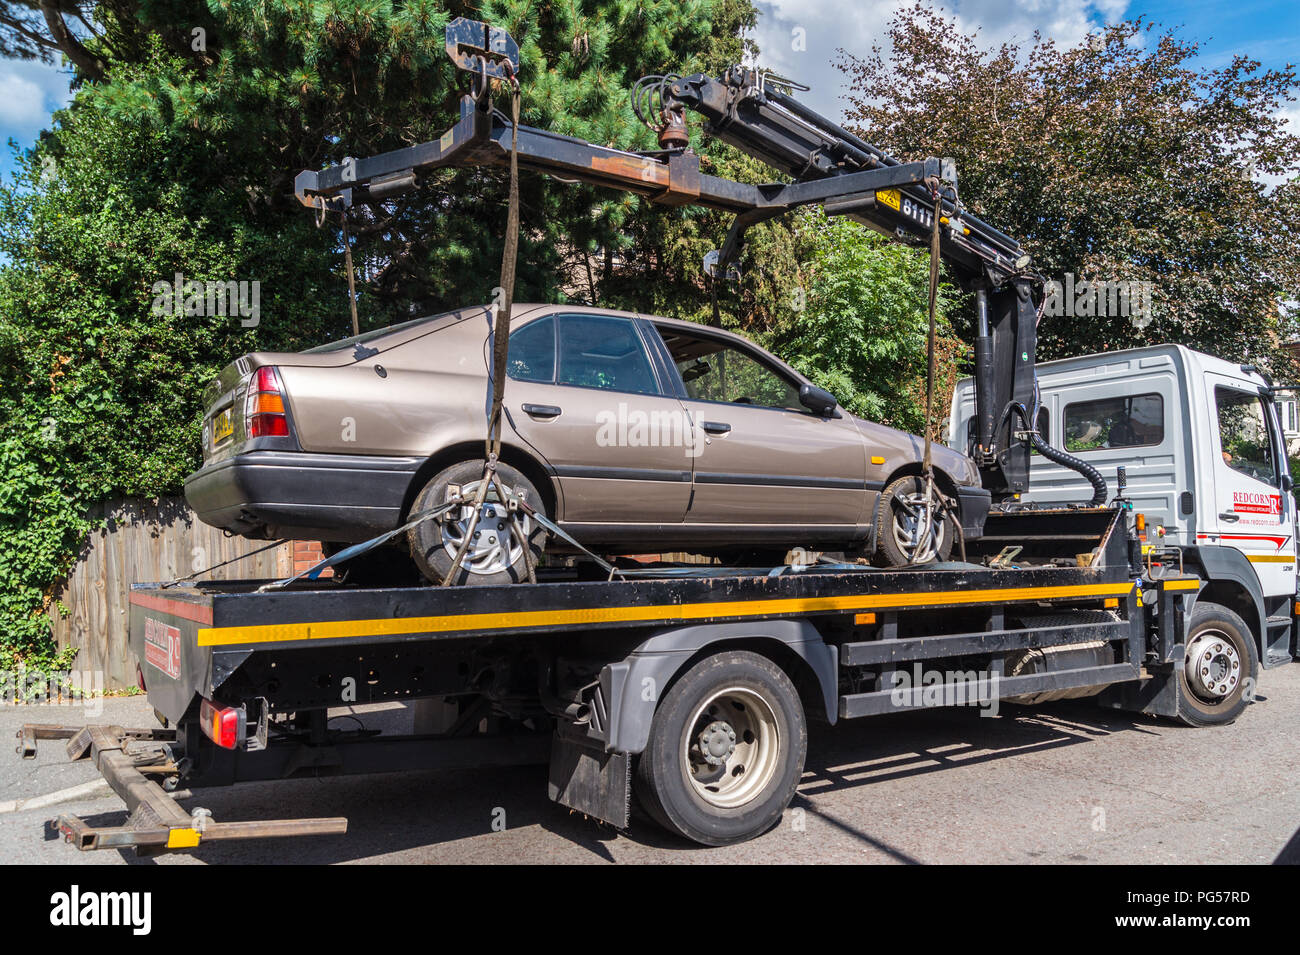 A 1992 Nissan Primera 2.0 LSI Automatic hatchback car being lifted onto a Mercedes Atego recovery lorry for recycling, South Woodford, London, England Stock Photo